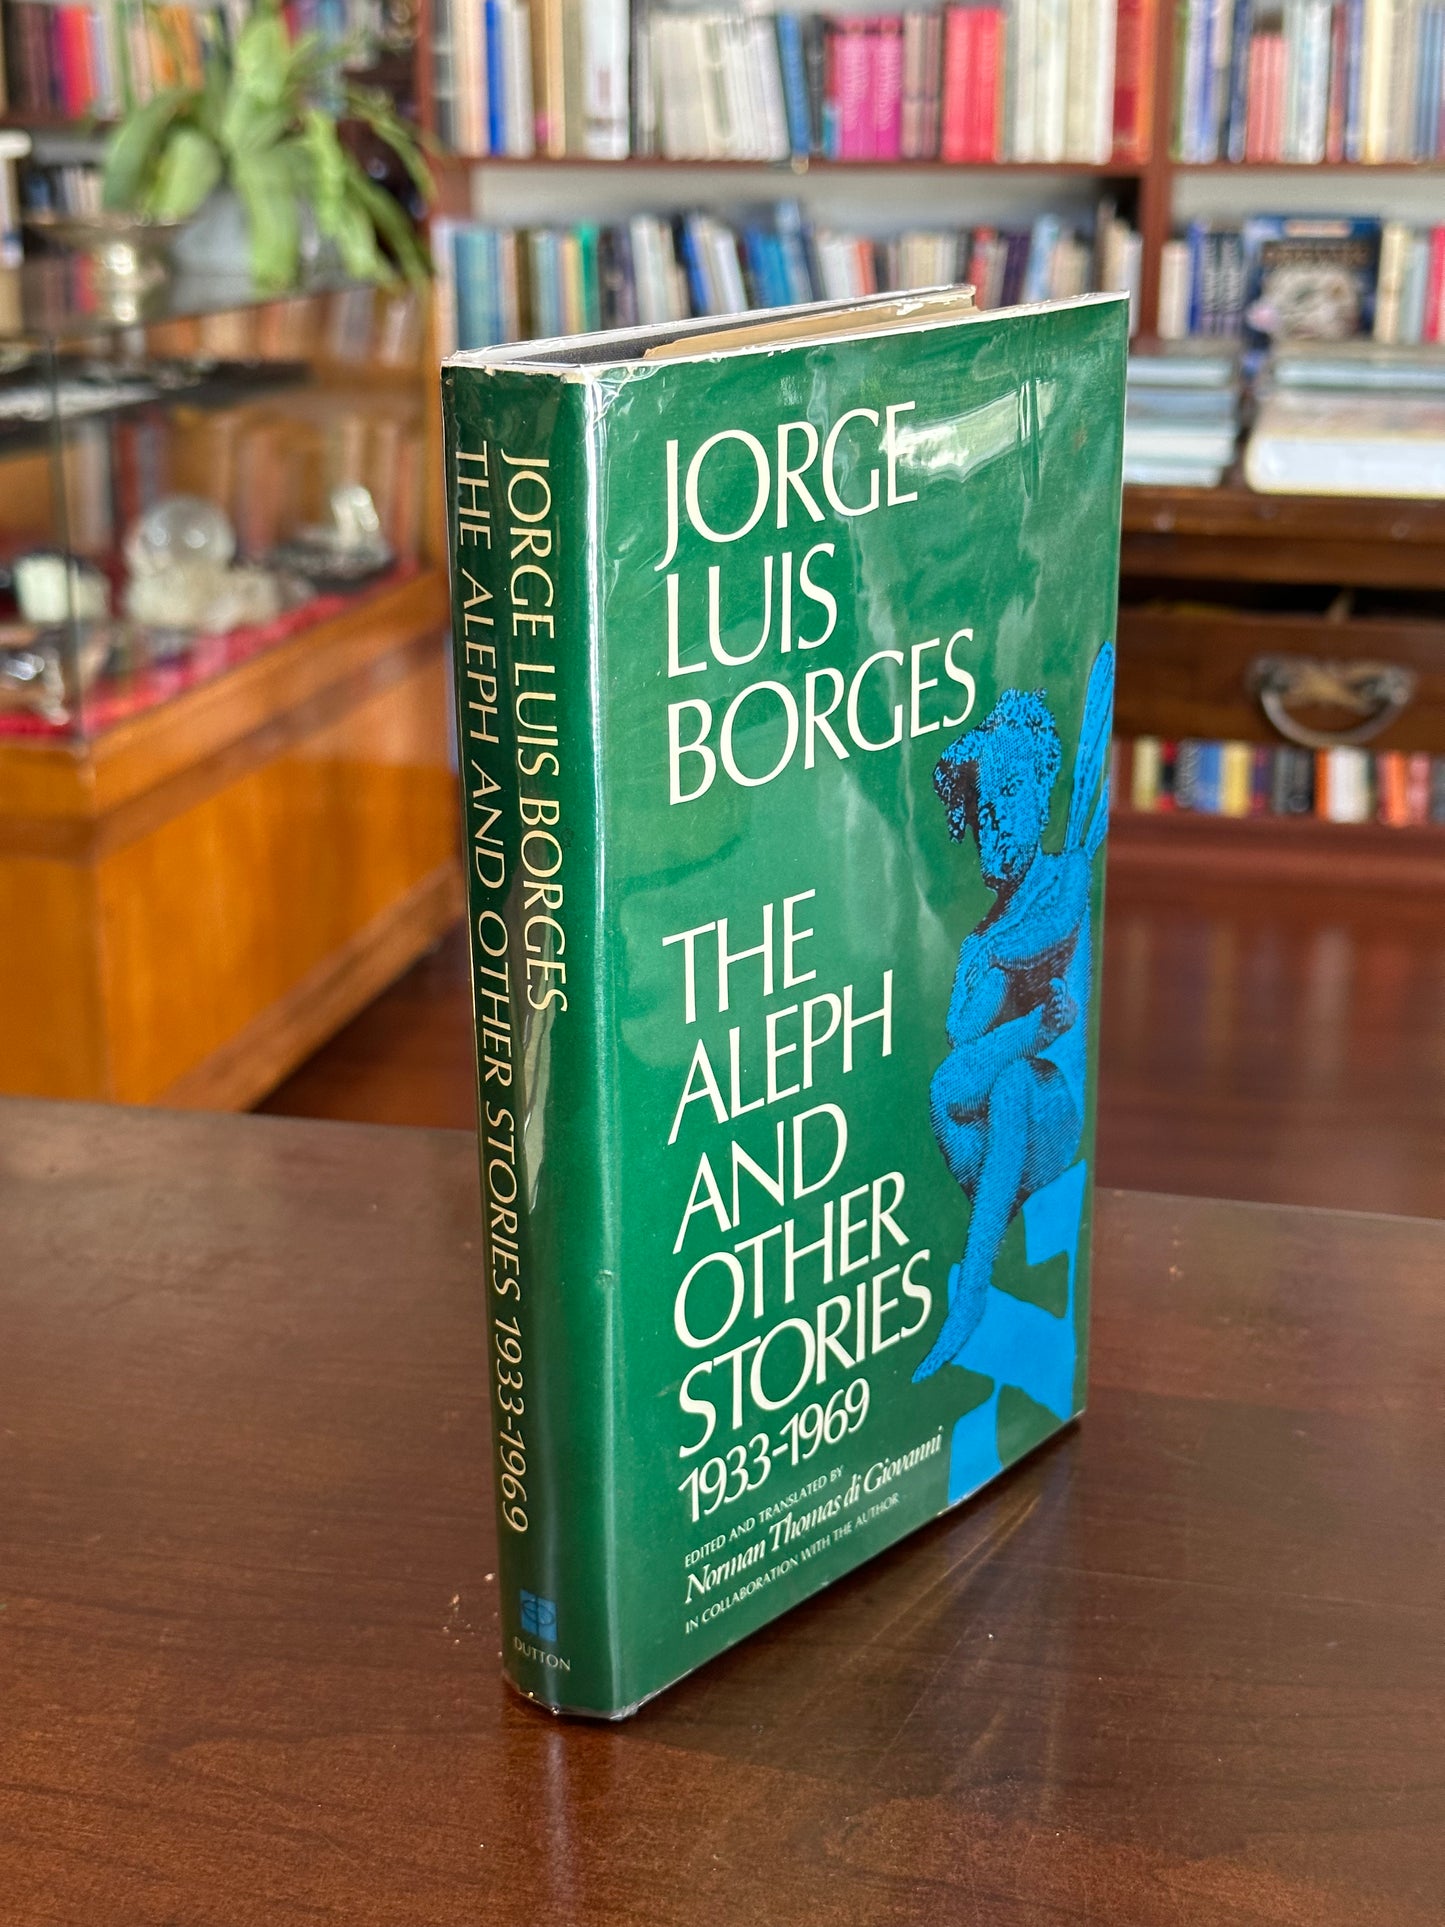 The Aleph and Other Stories by Jorge Luis Borges (First Edition)